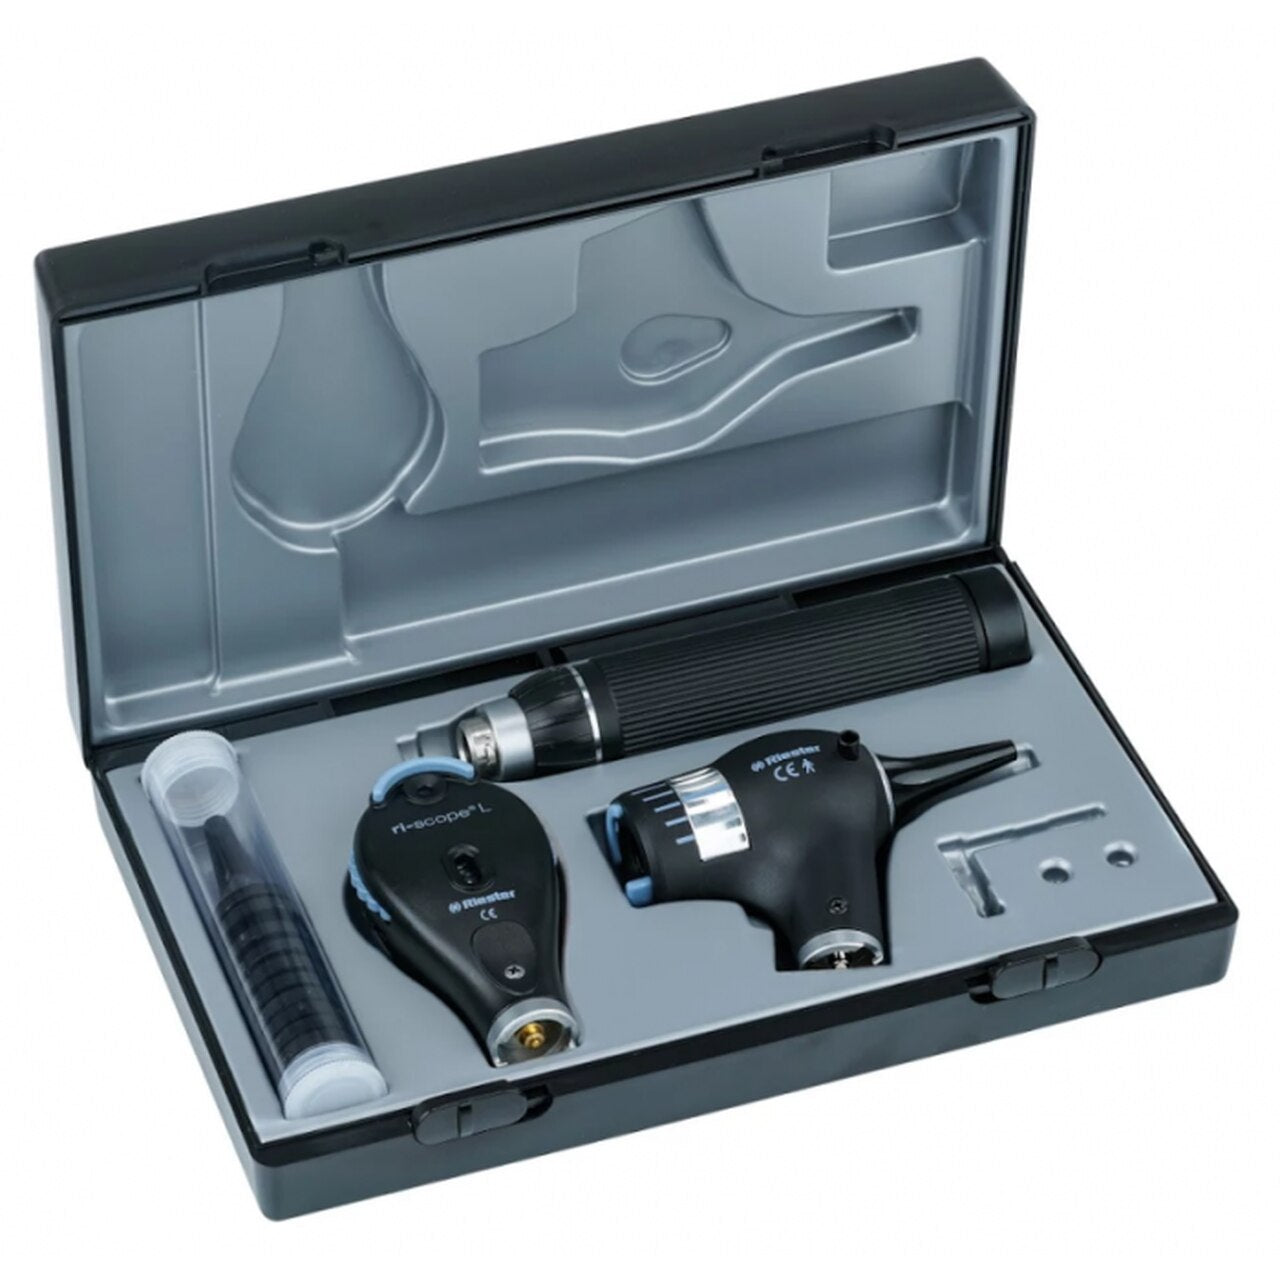 Riester EliteVue Otoscope / Ophthalmoscope Set LED 3.5 V, with 2 x C Handles, 2 Rechargeable Li-Ion Batteries & Desk Charger